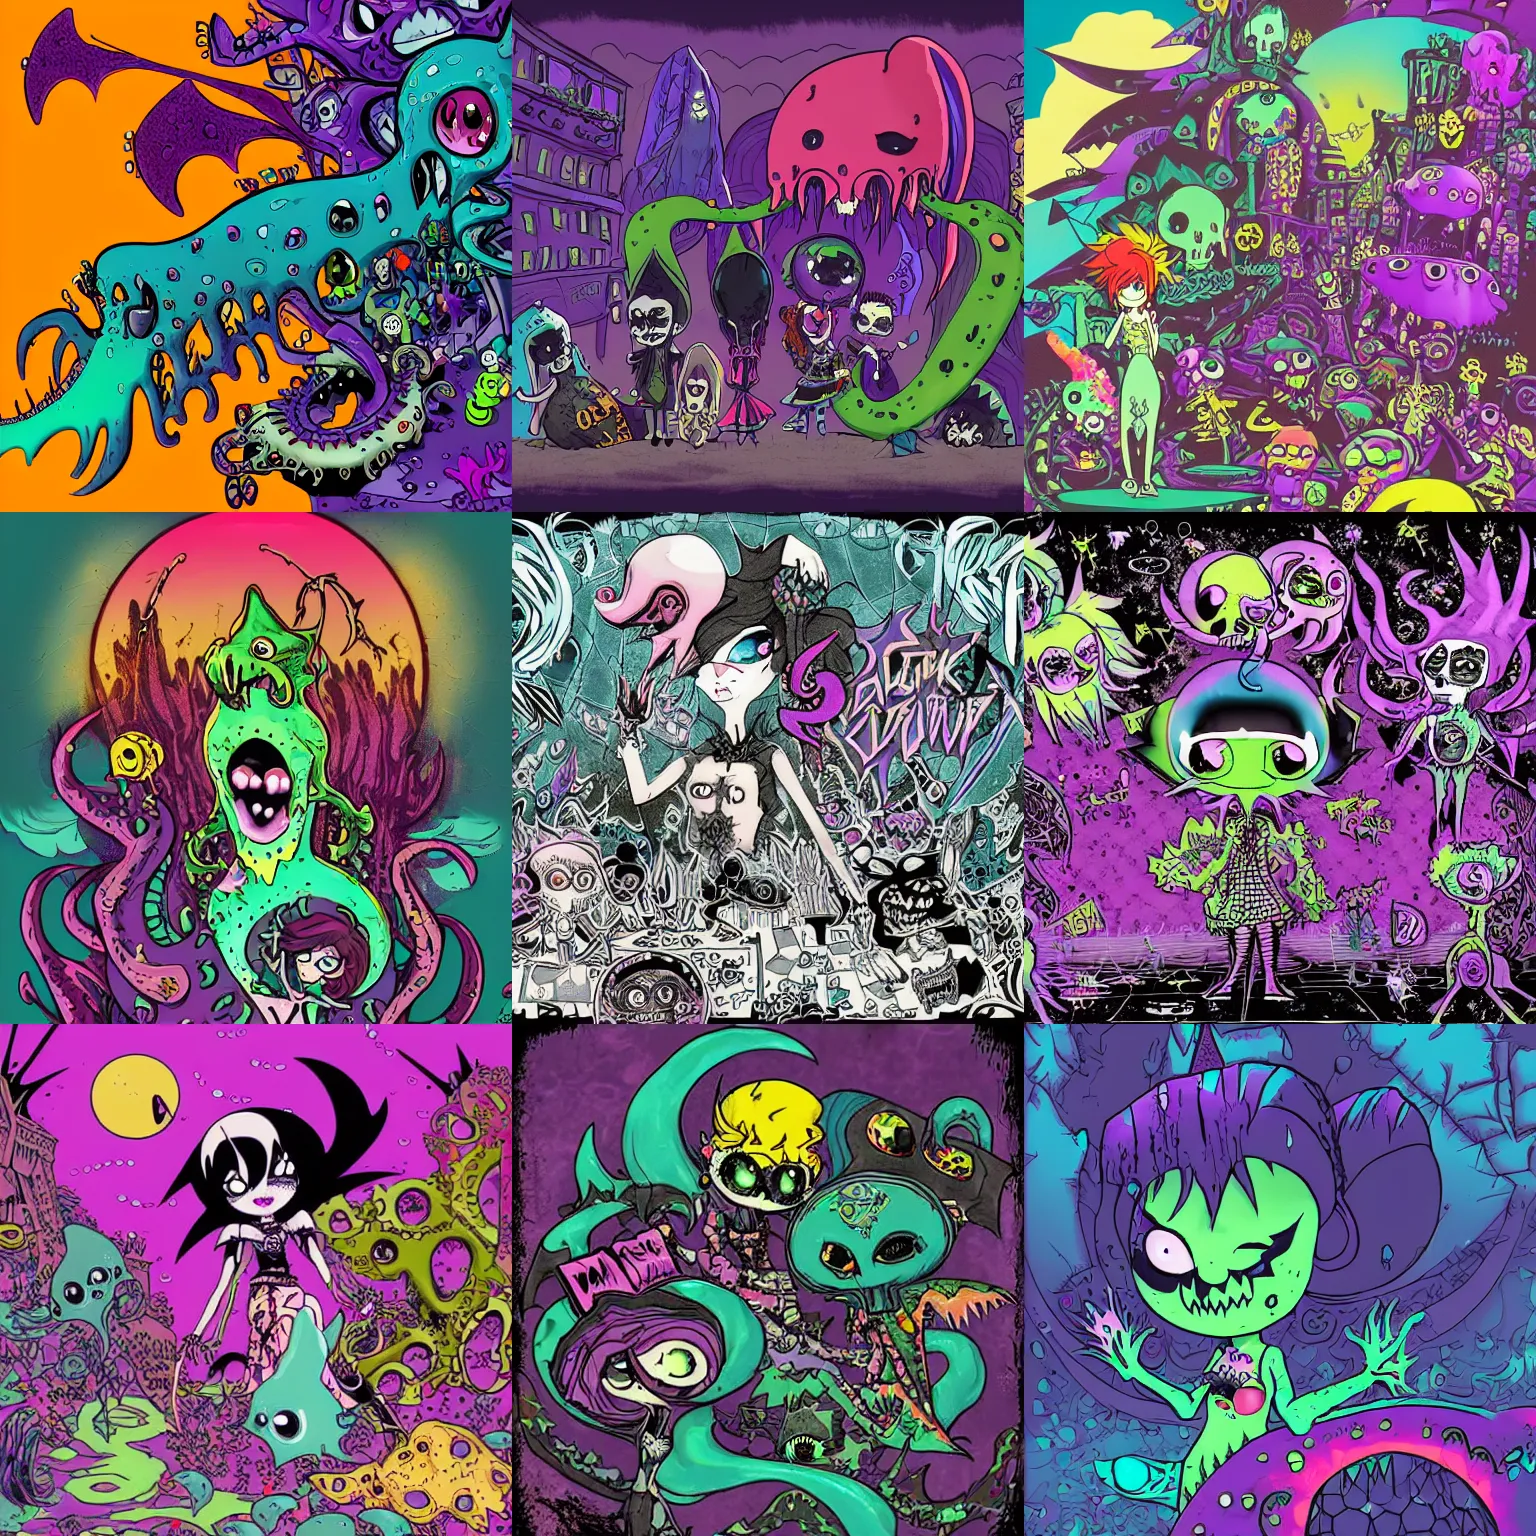 Prompt: lisa frank gothic punk vampiric rockstar vampire squid dark ocean abyss with a crowded town at the center concept art designs of various shapes and sizes by genndy tartakovsky and the creators of fret nice at pieces interactive and splatoon by nintendo and the psychonauts by doublefine tim shafer artists for background art on the new hotel transylvania film starring a vampire squid kraken monster